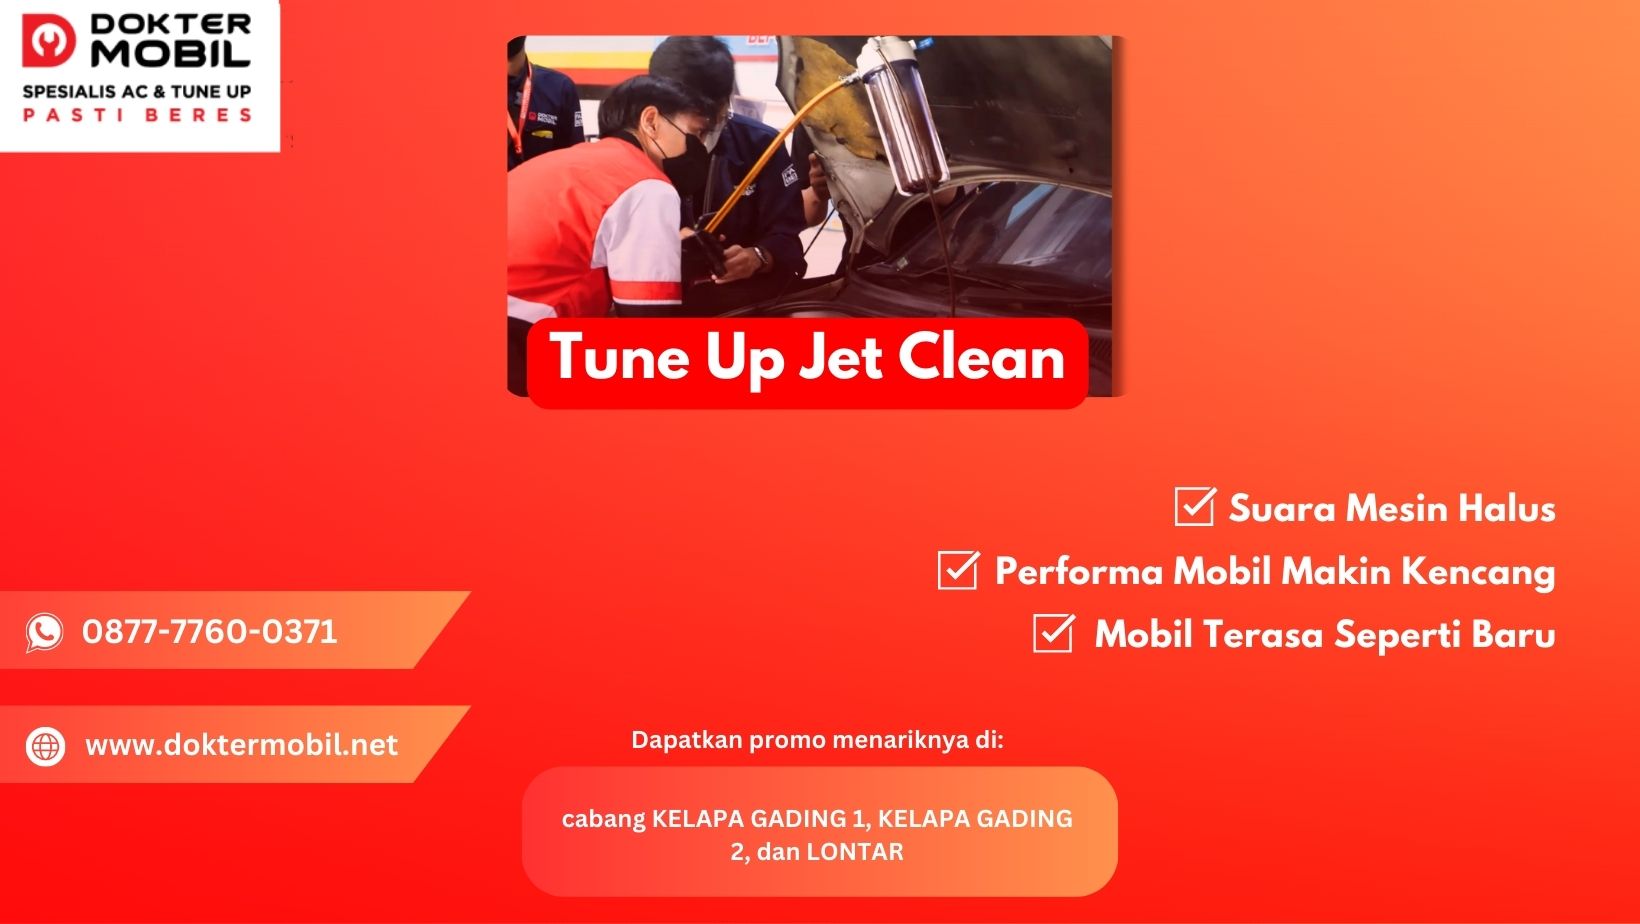 Tune Up Jet Clean